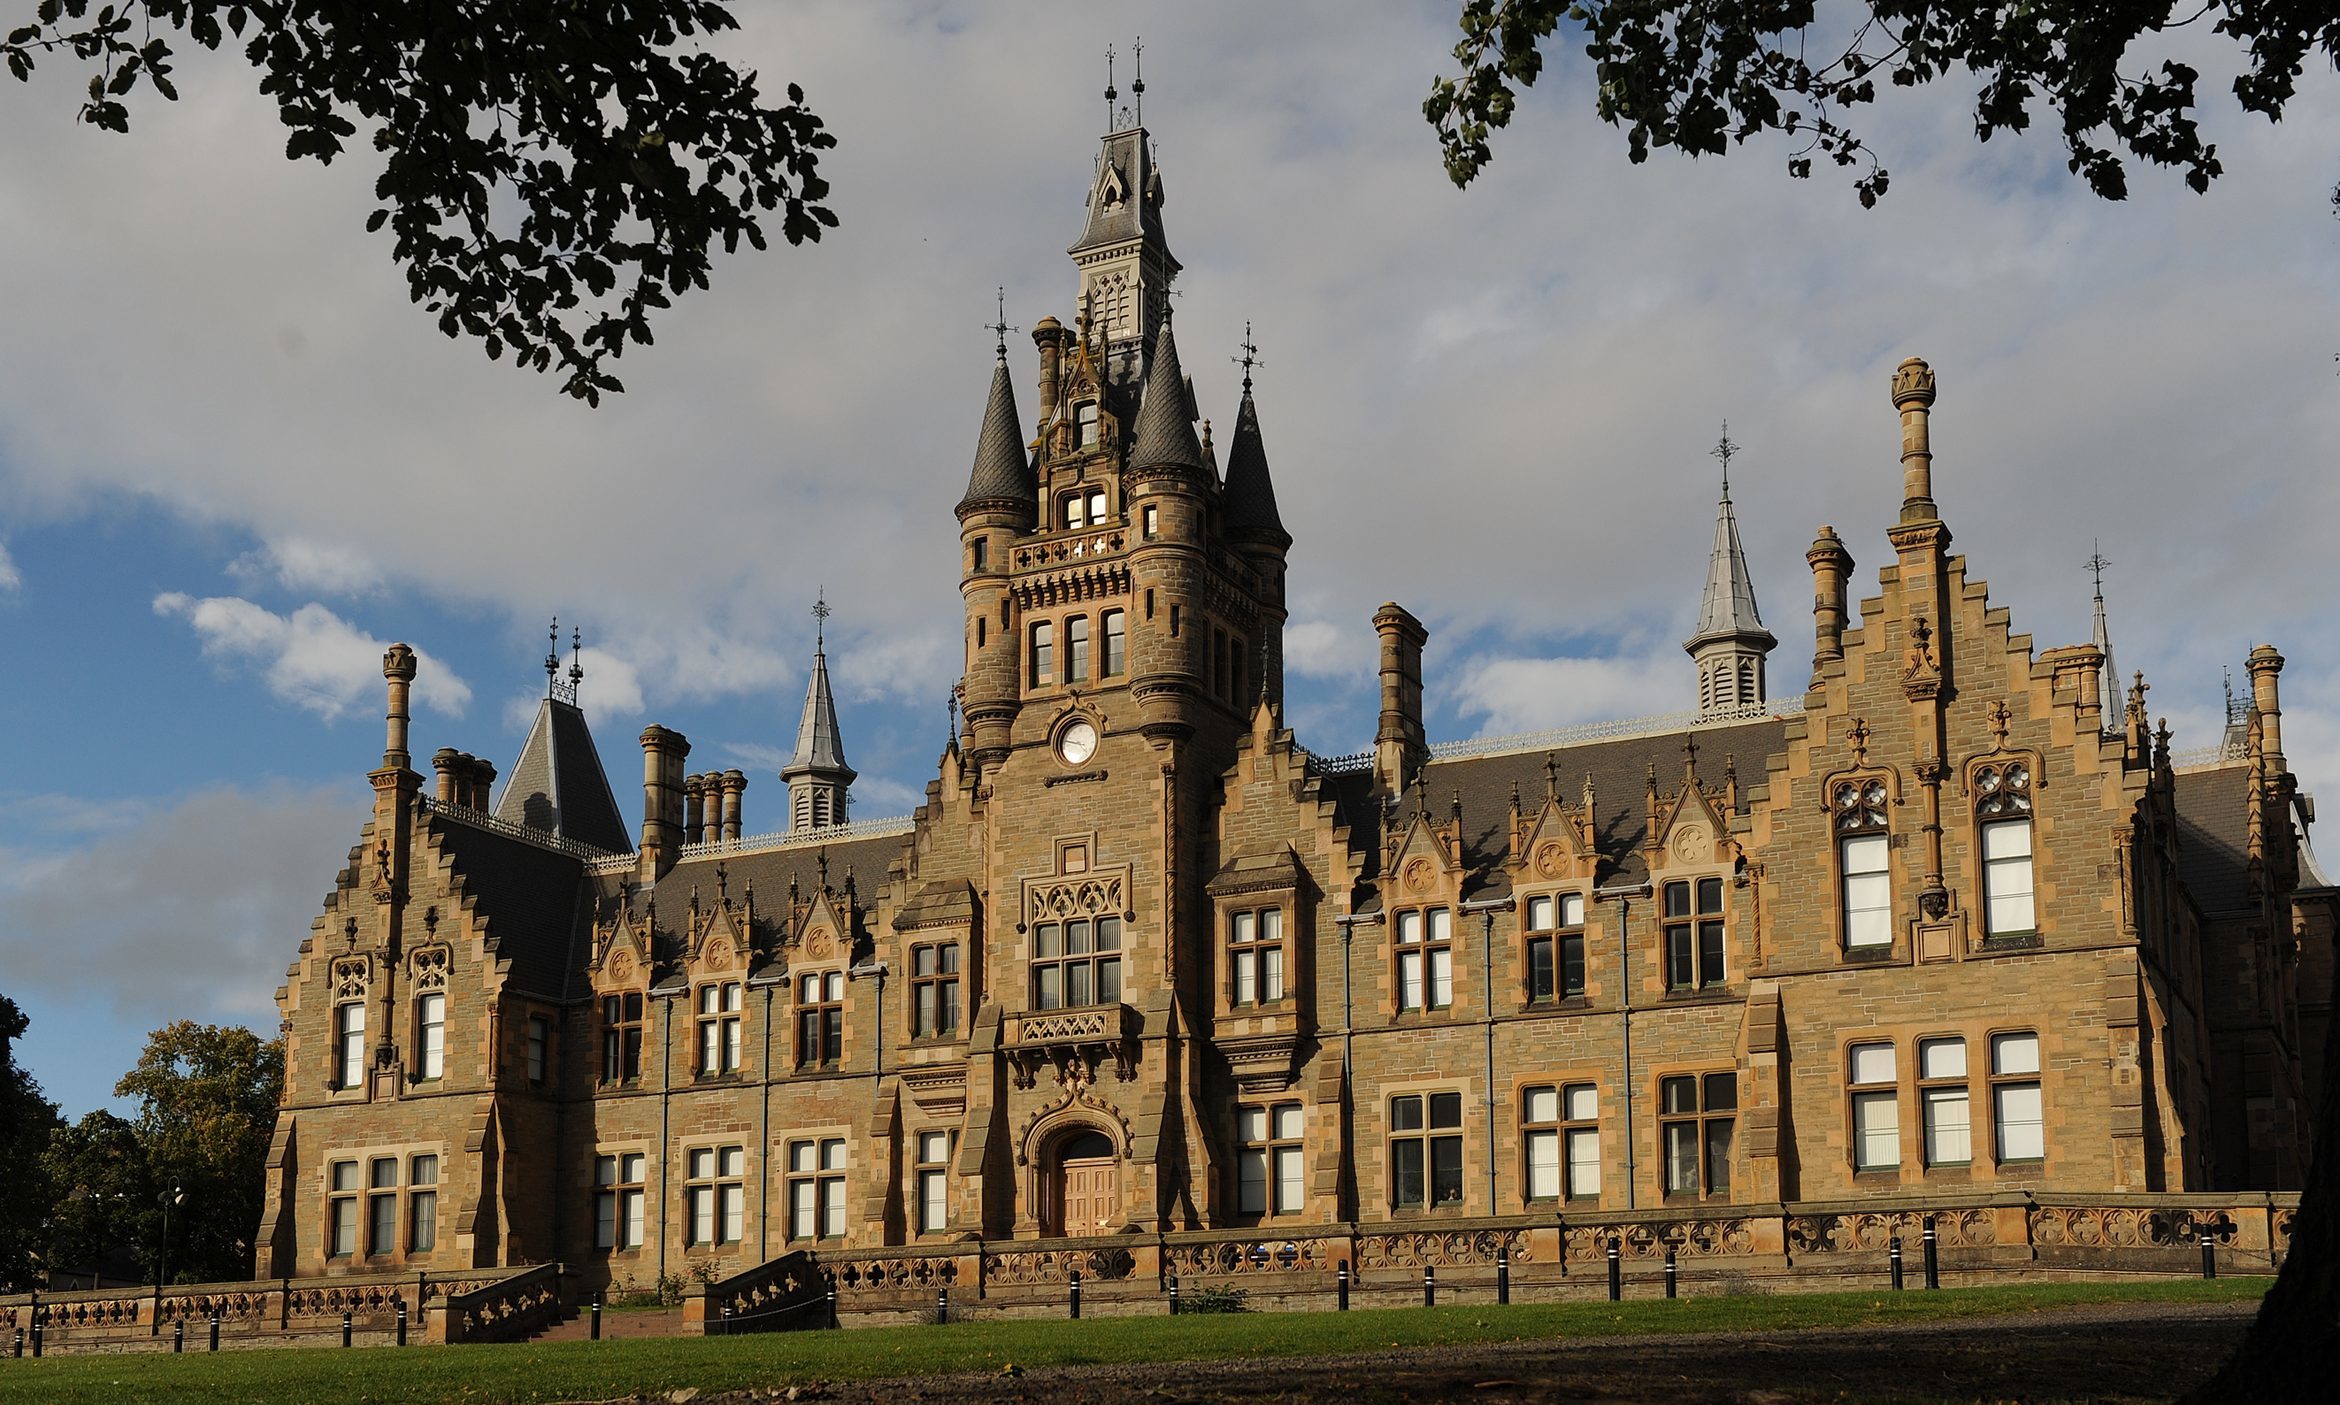 The iconic Morgan Academy building is celebrating its 150th birthday this year.